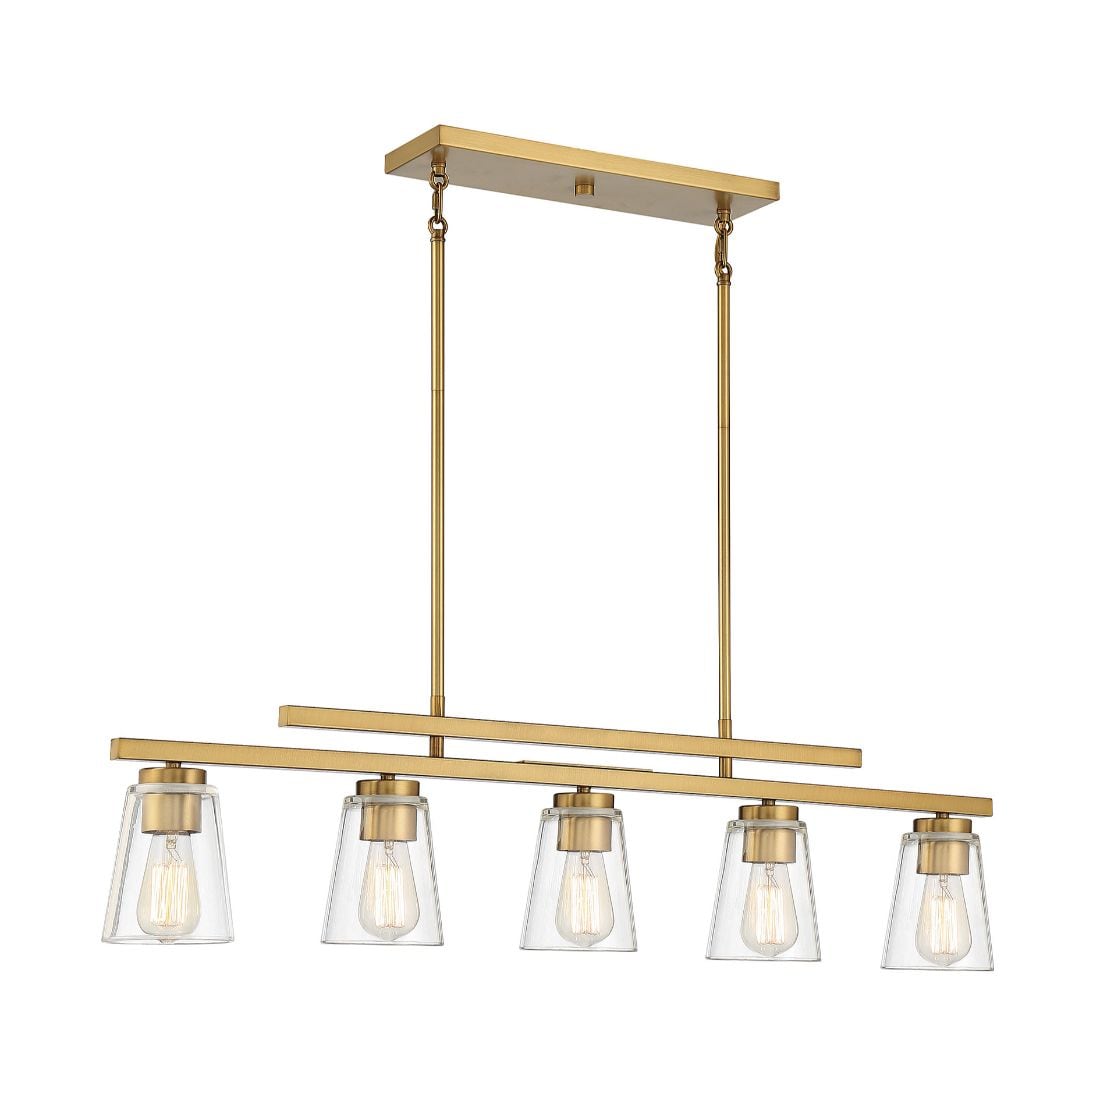 5-Light Warm Brass Modern/Contemporary Dry Rated Chandelier at Lowes.com